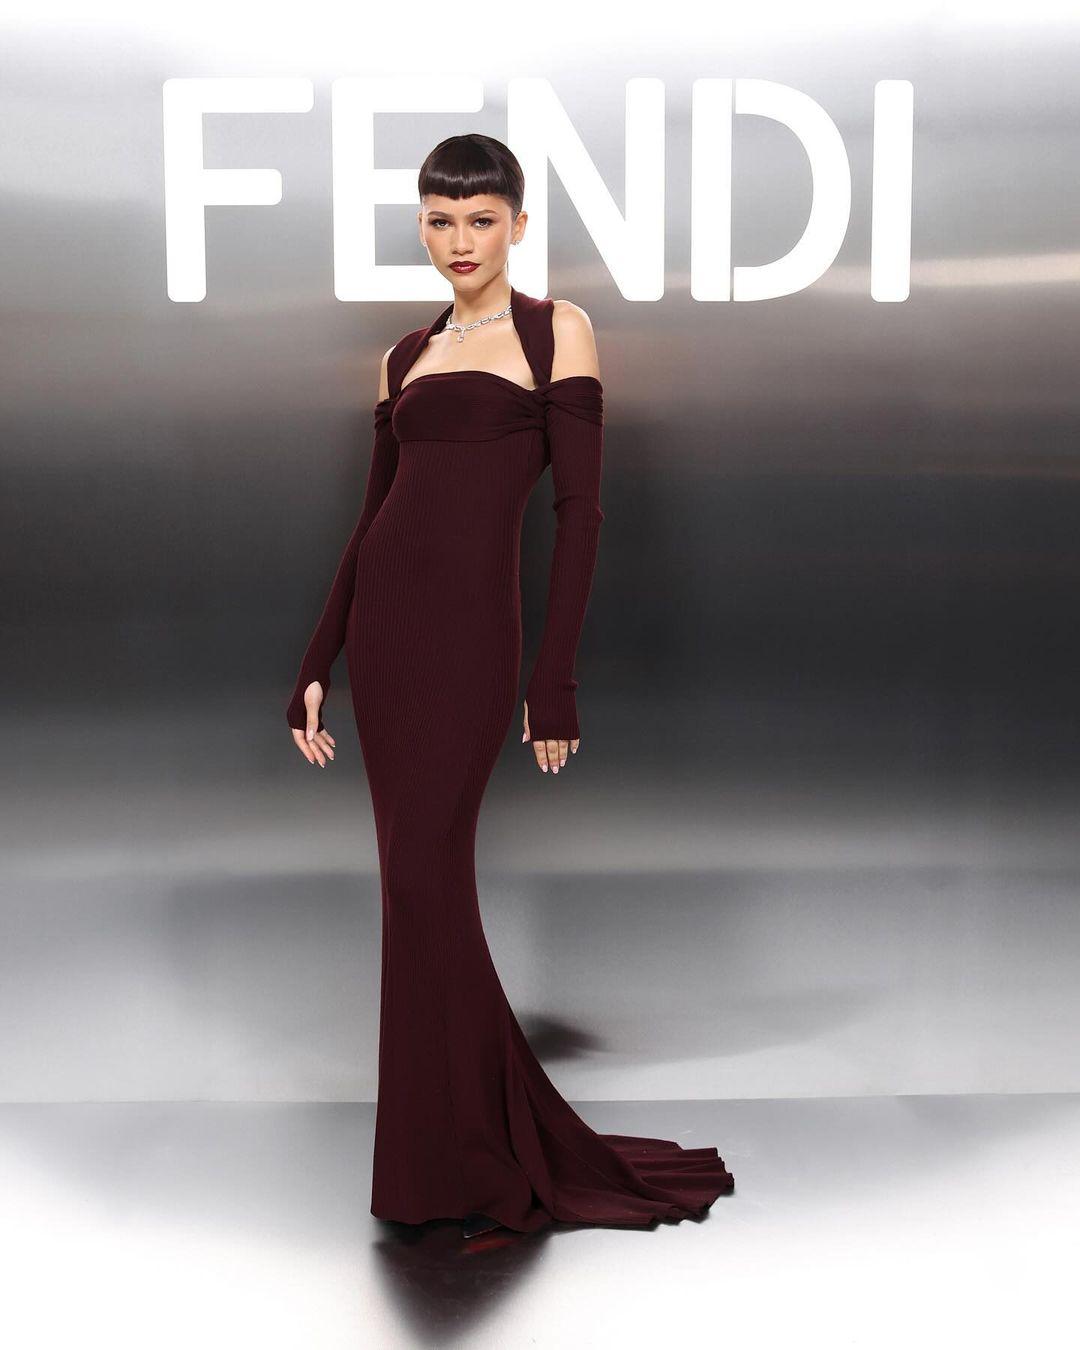 Zendaya looked absolutely fabulous at the Fendi haute couture show during Paris Couture Week 2024. The 27-year-old actress wore a stunning deep burgundy gown that hugged her figure, with long off-the-shoulder sleeves and a striking halter neck.